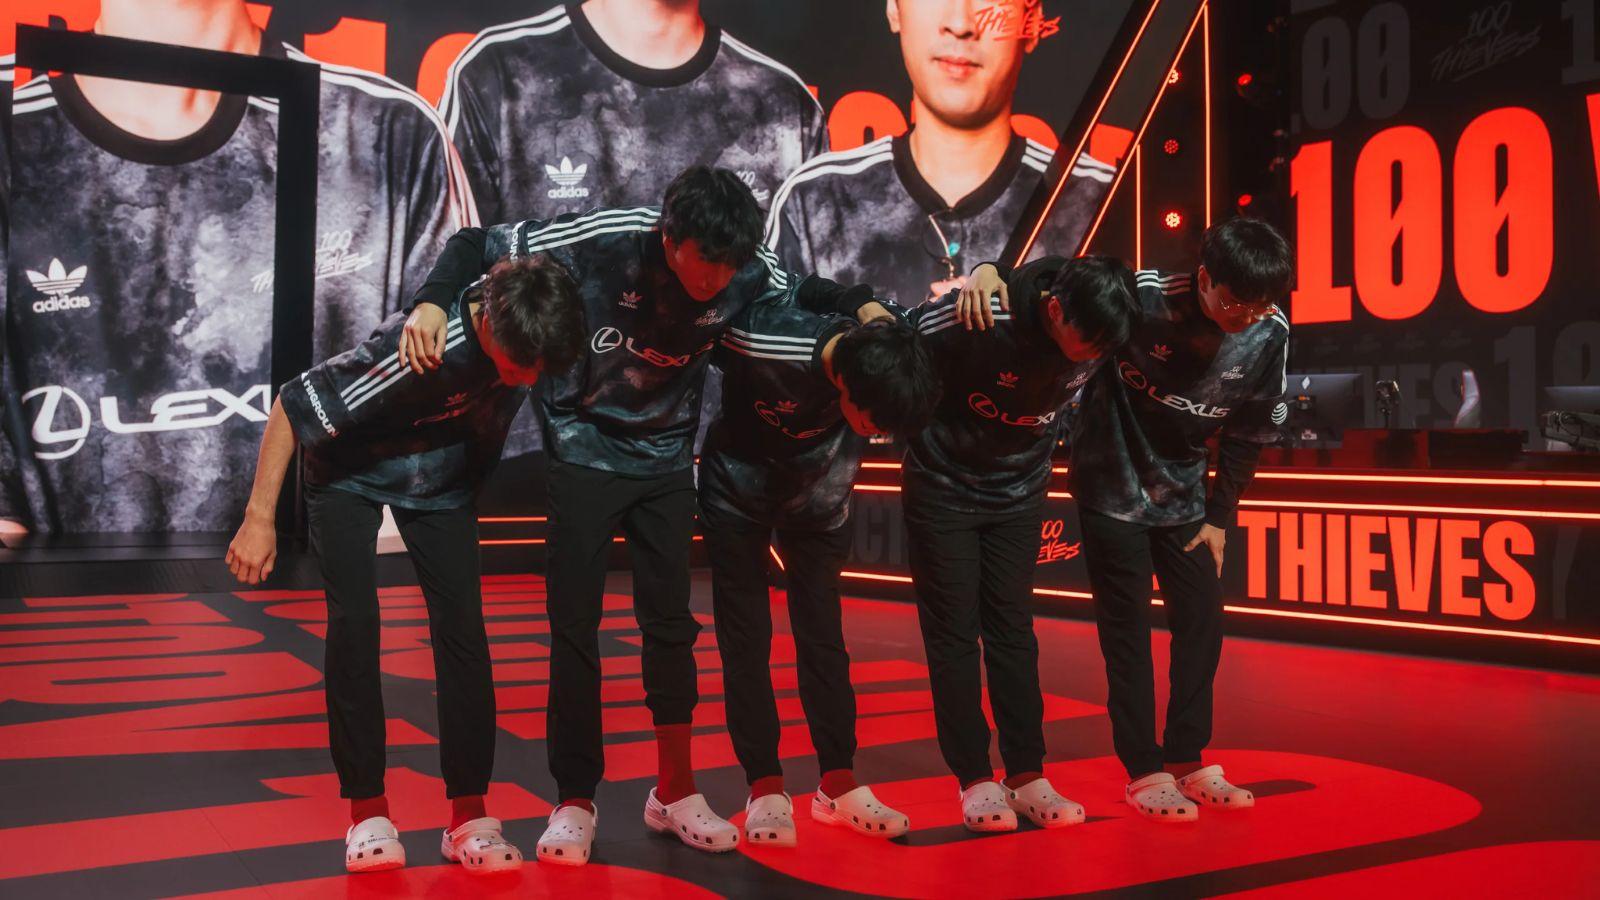 100 Thieves partner with Crocs